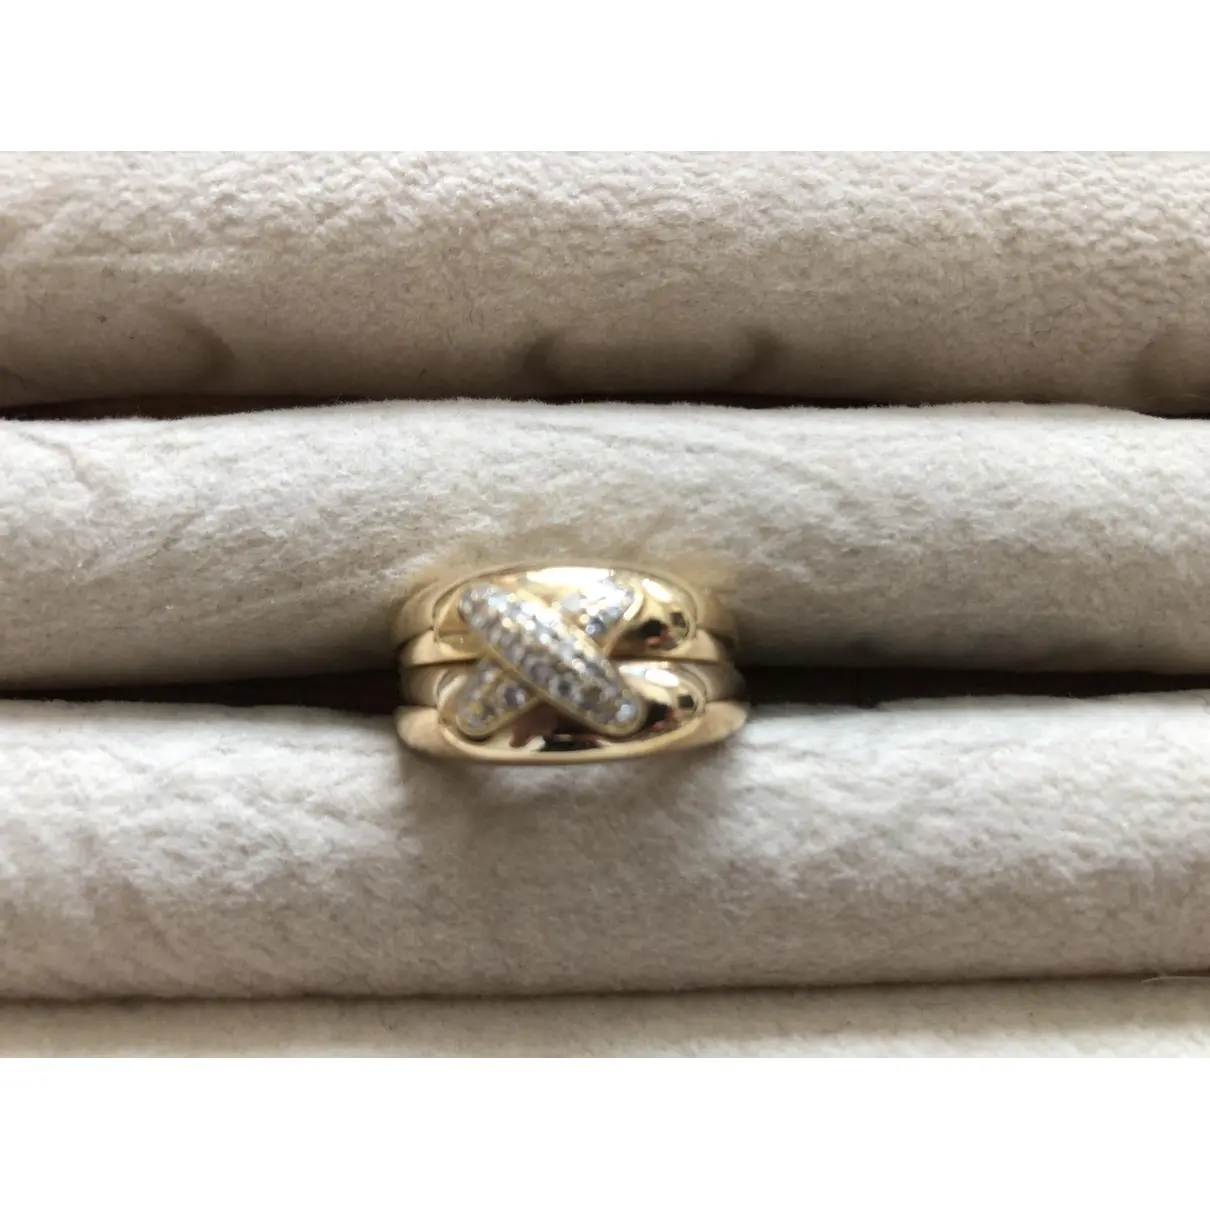 Buy Chaumet Liens yellow gold ring online - Vintage